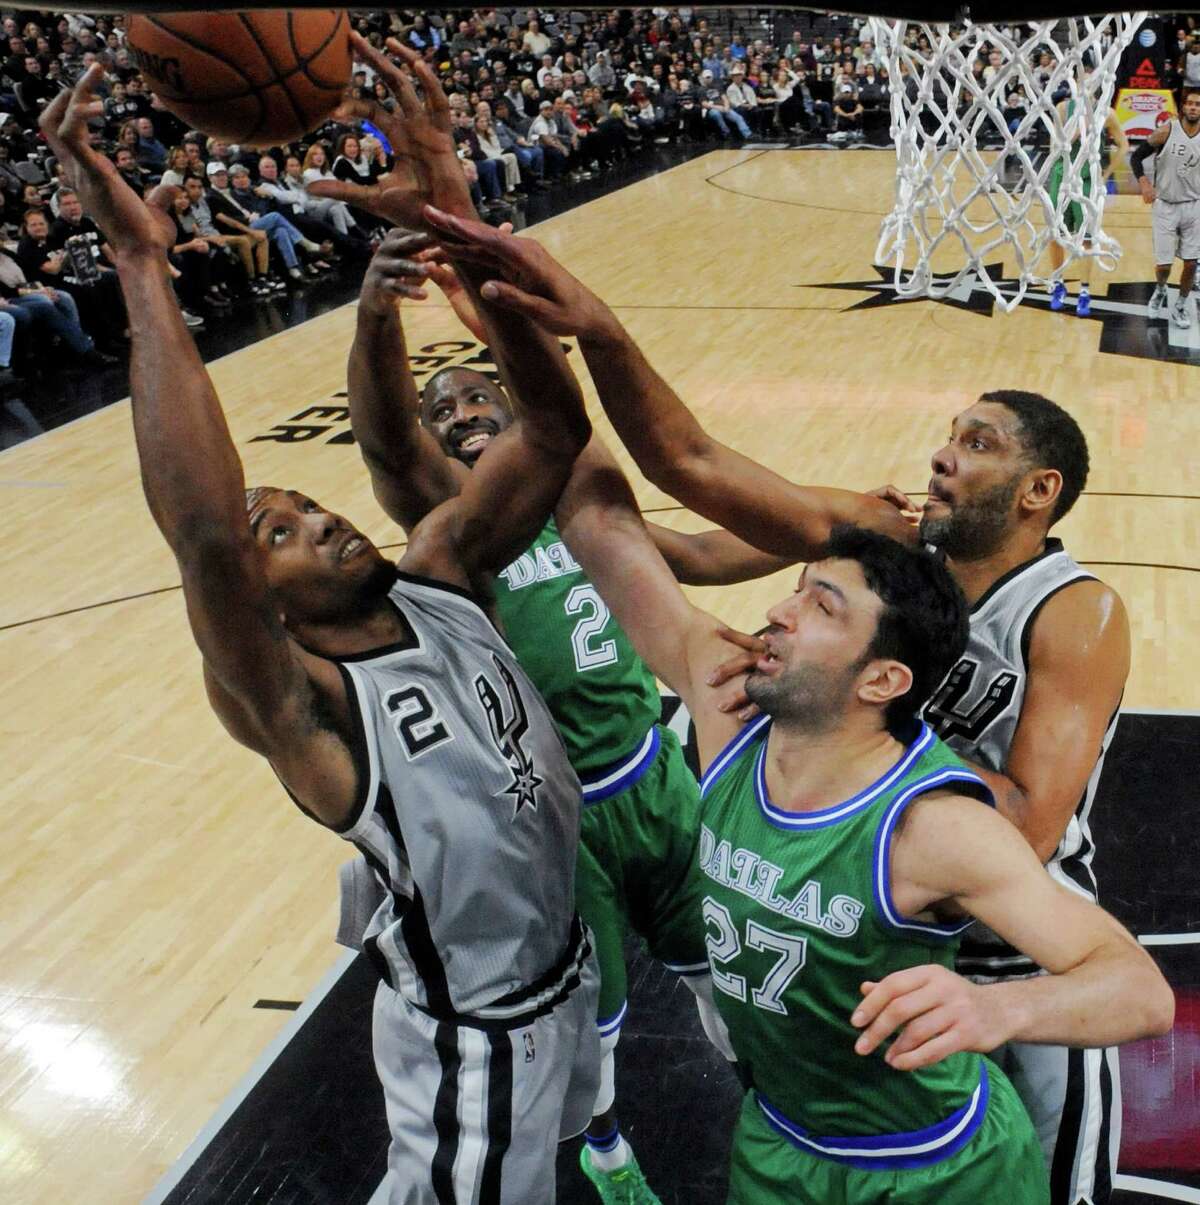 San Antonio Spurs' Kawhi Leonard (from left), Dallas Mavericks' Raymond Felton, Zaza Pachulia, and Tim Duncan grab for a rebound during first half action Sunday Jan. 17, 2016 at the AT&T Center. The Spurs won 112-83.